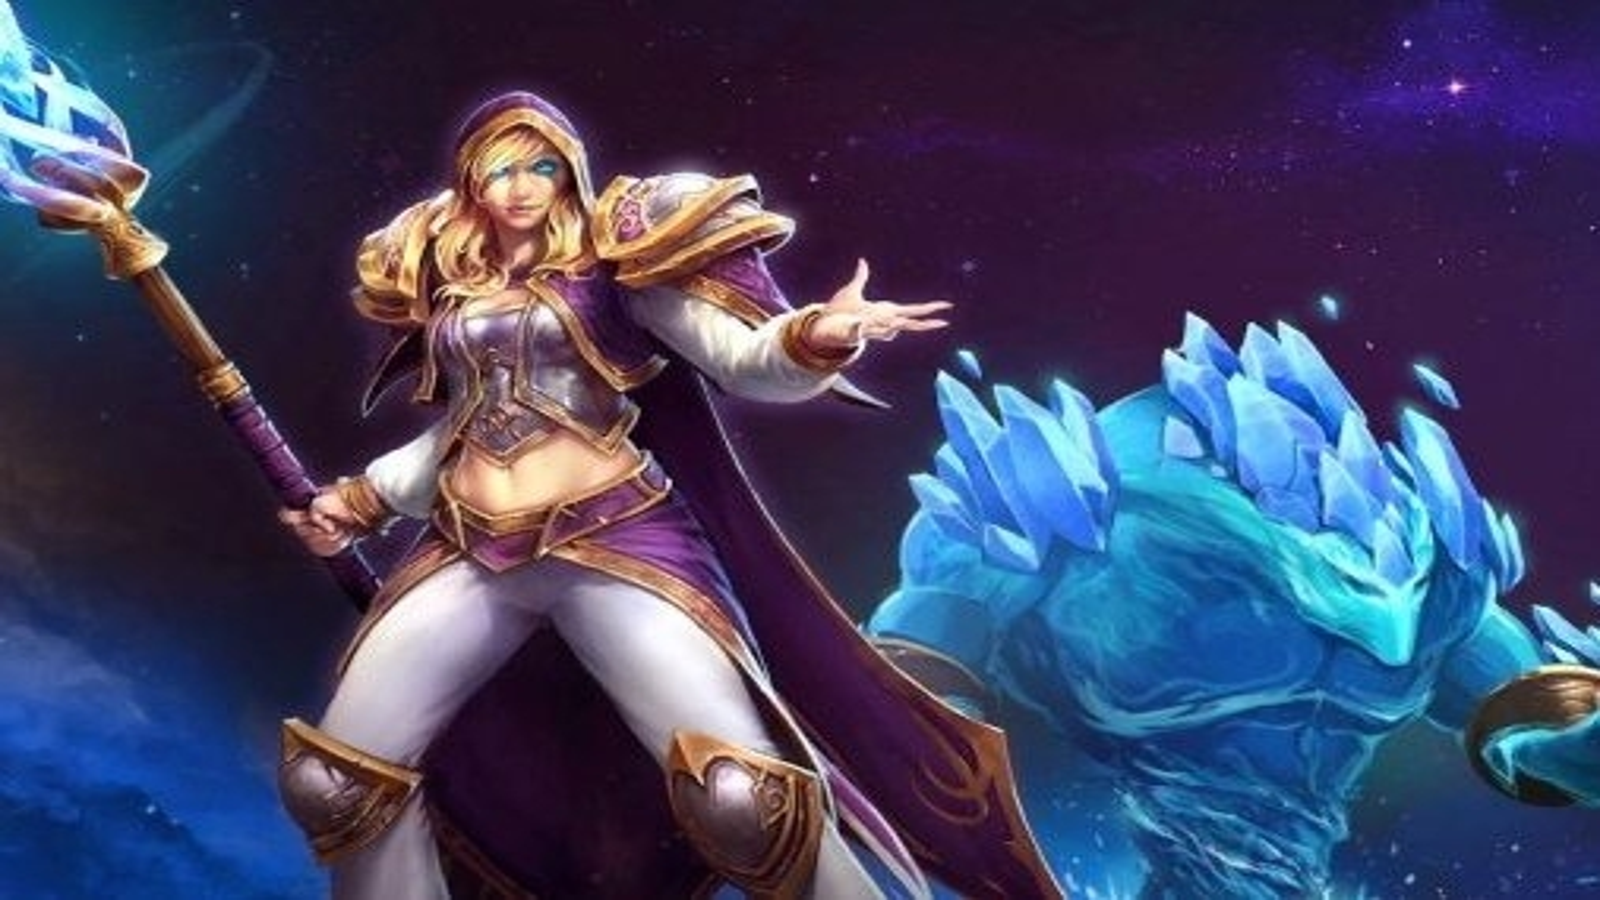 Heroes of the Storm's biggest update is an honest-to-goodness story